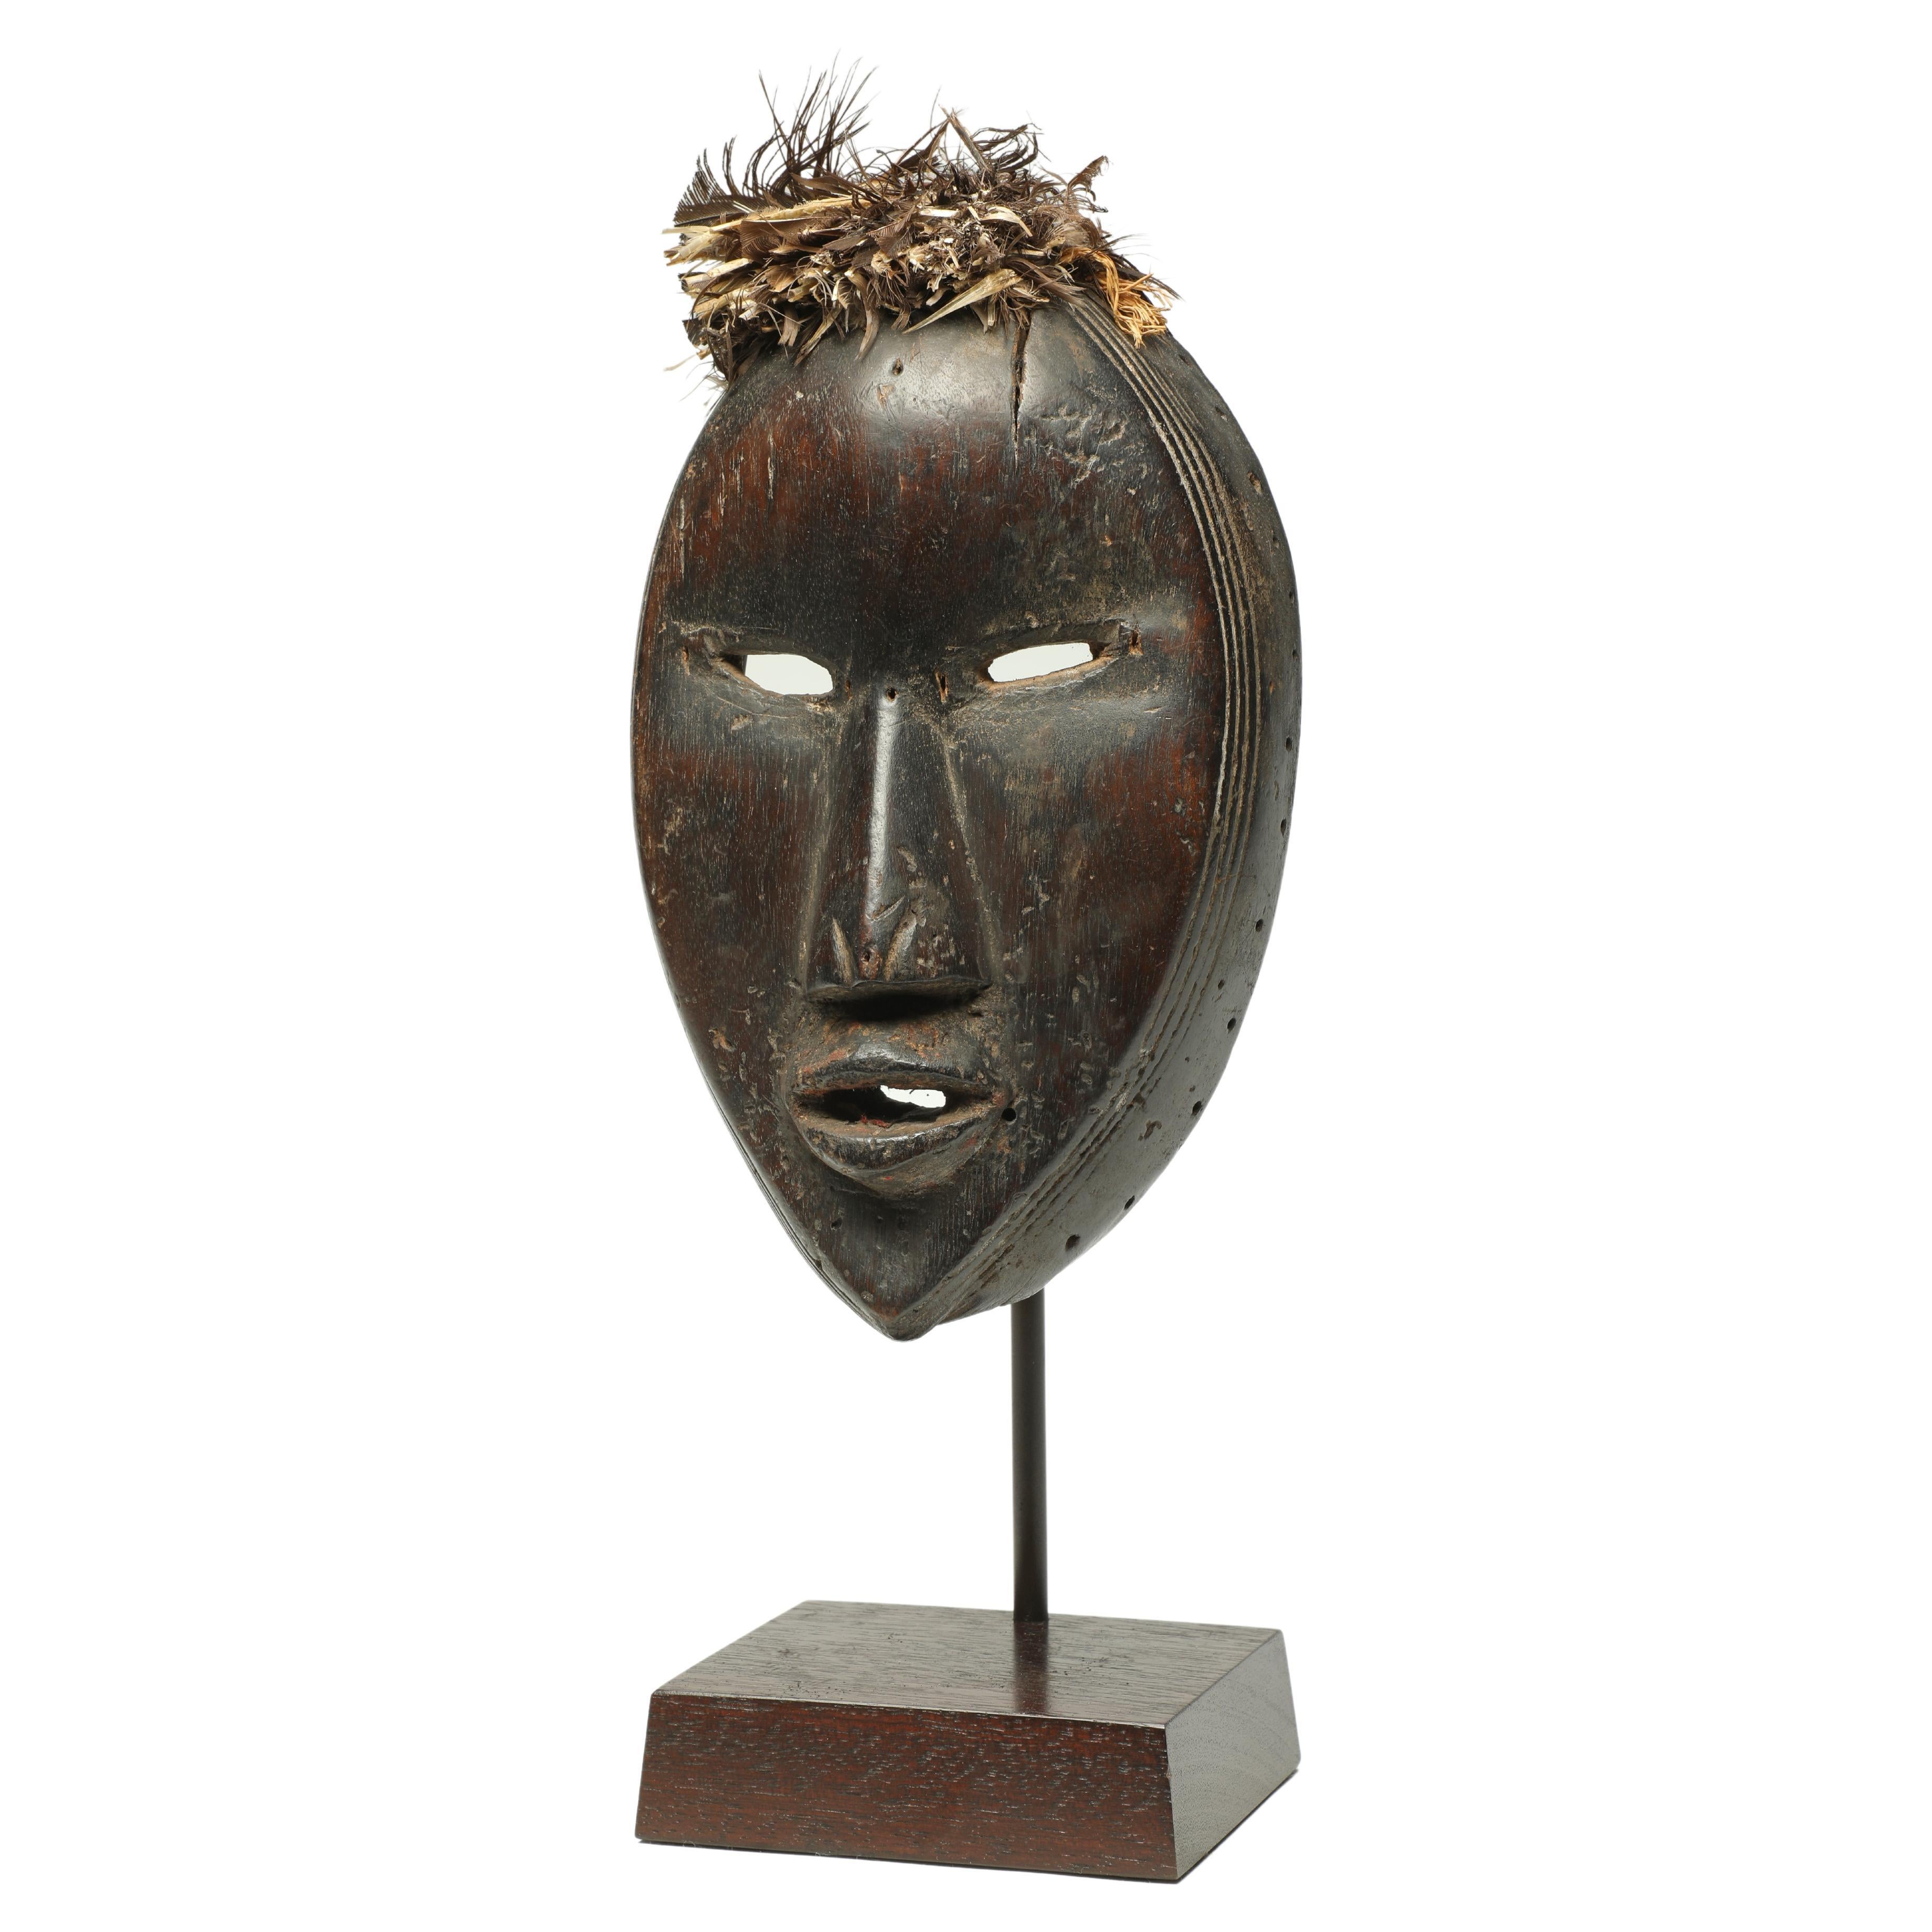 Expressive Early Classic Cubist Dan Mask Early 20th Century Liberia, Africa